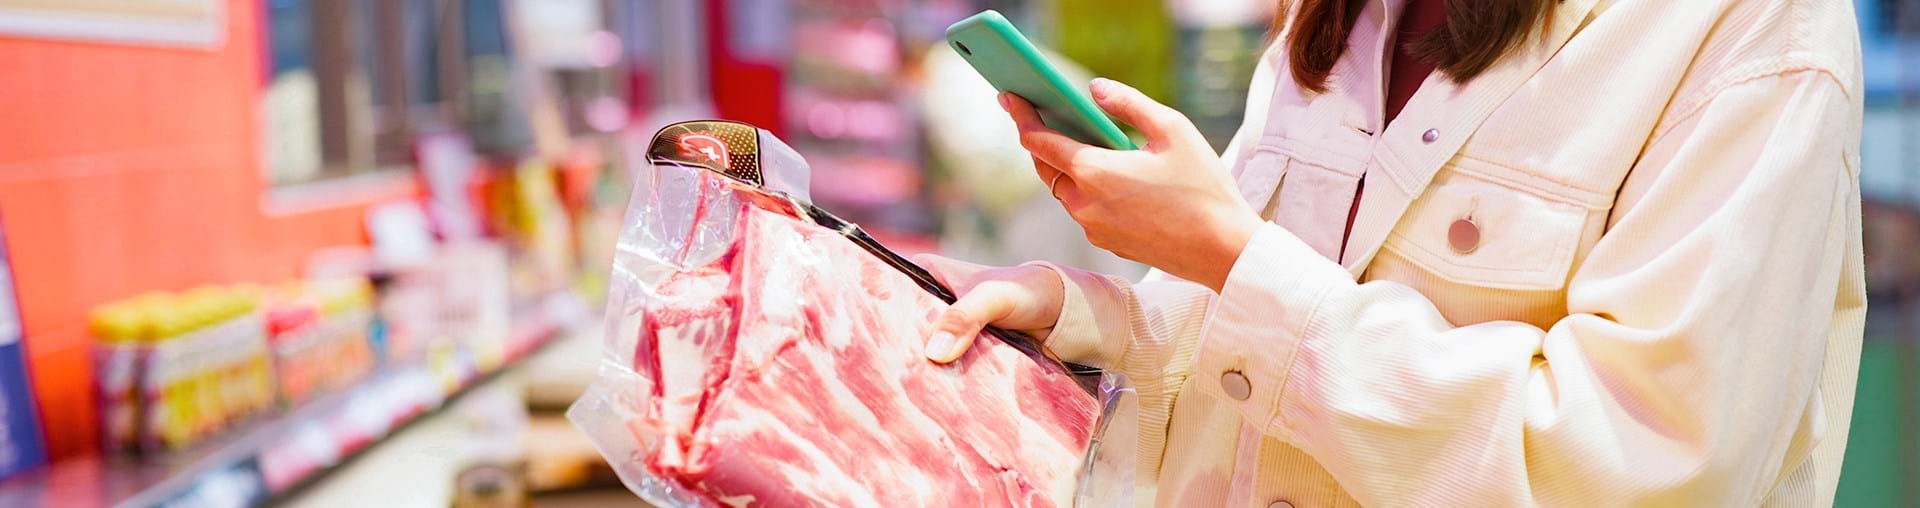 Consumer purchasing meat product